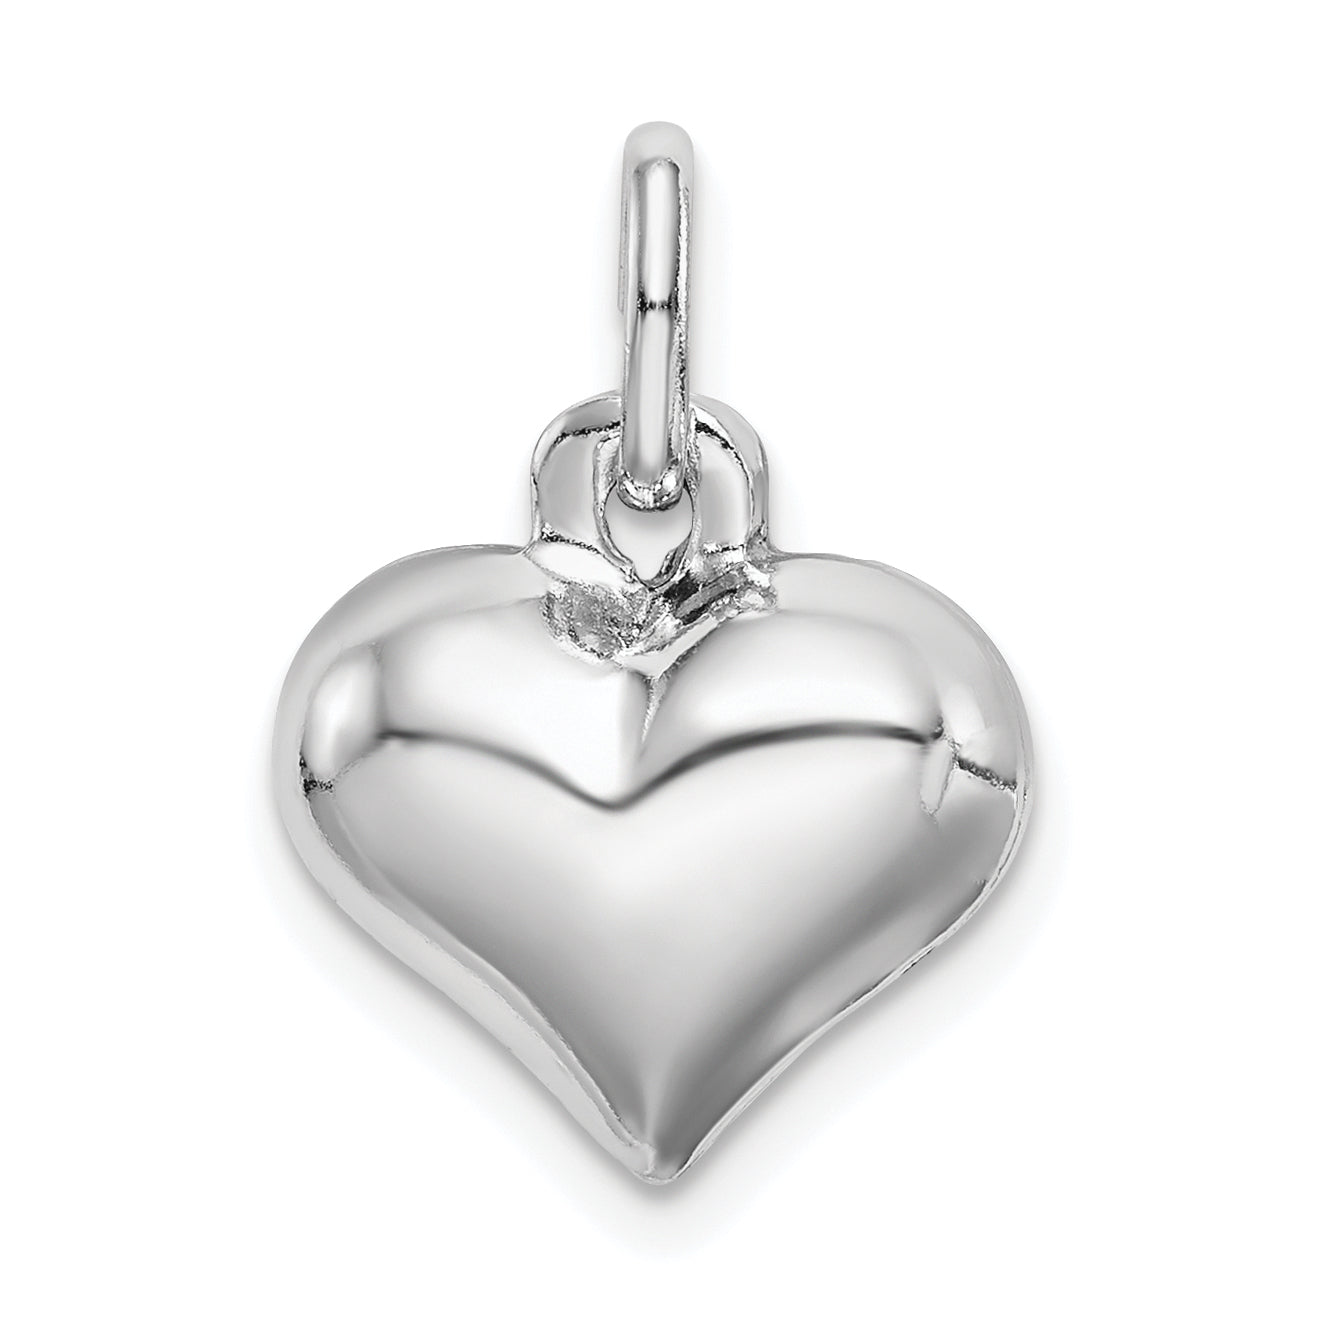 Sterling Silver Rhodium-plated Puffed Heart Charm